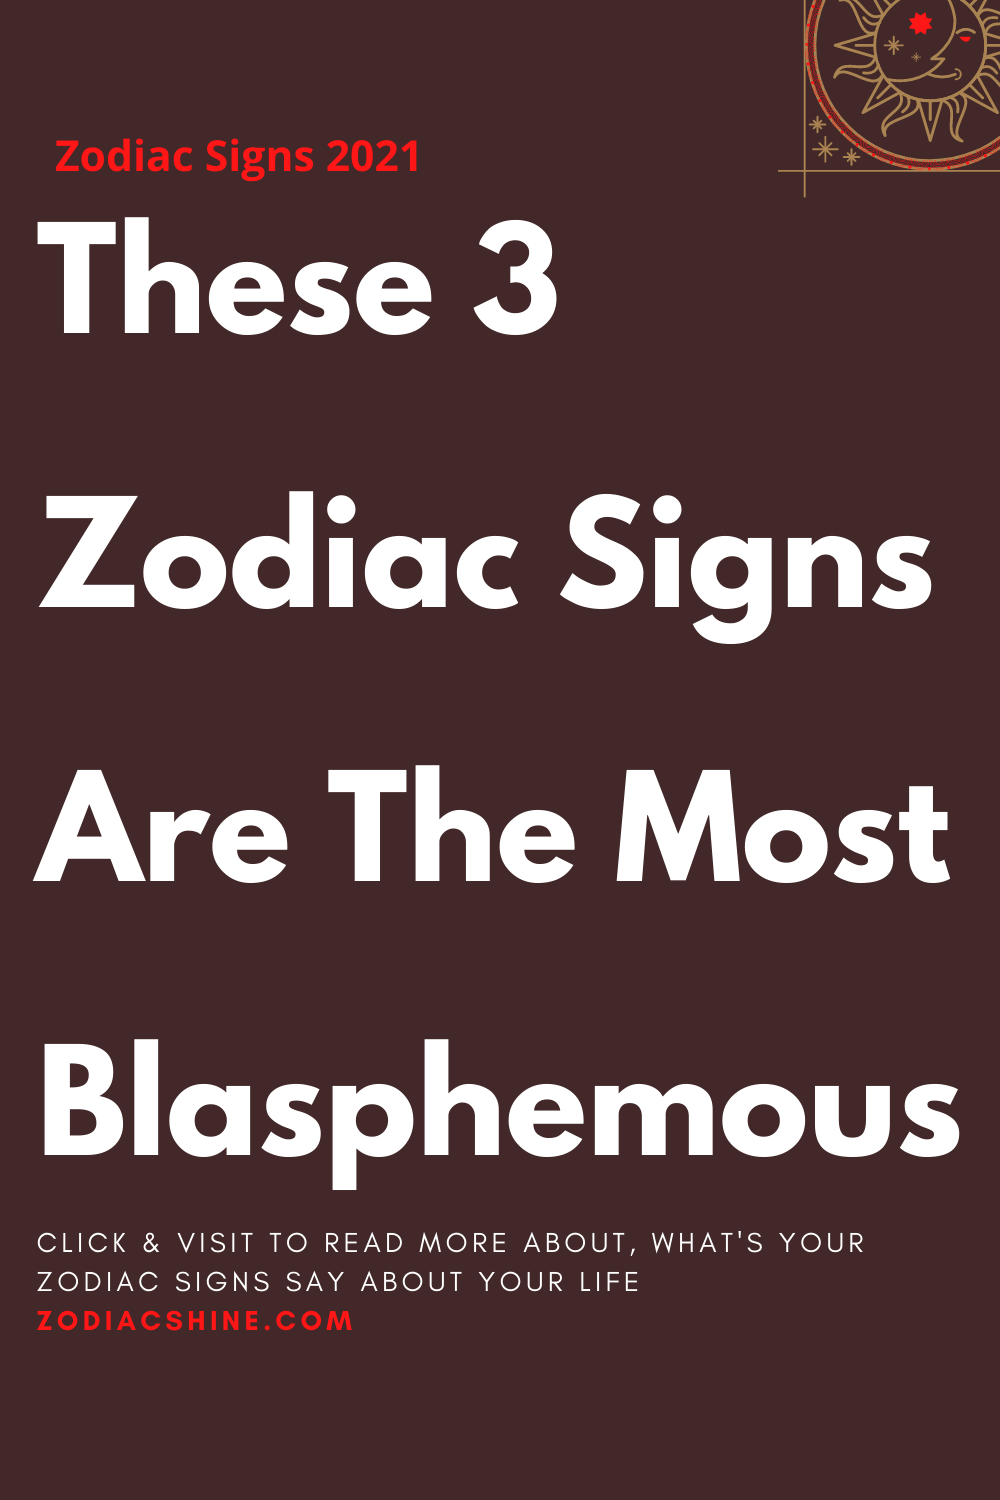 These 3 Zodiac Signs Are The Most Blasphemous